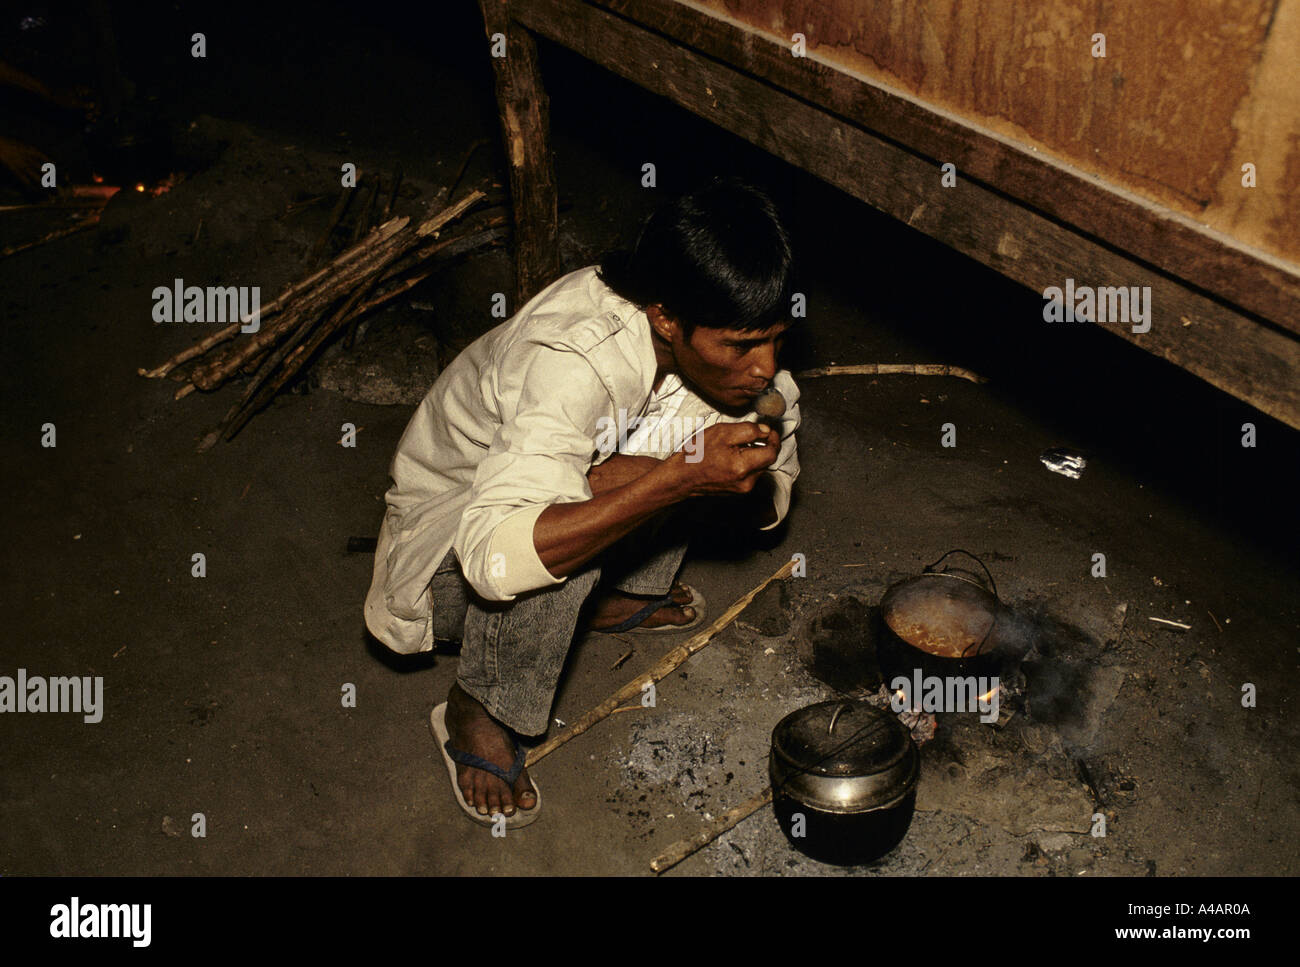 Seasonal migrant workers who do most of the sugar cane cutting live in squalid conditions, Hacienda Luisita, Philippines, 1991 Stock Photo